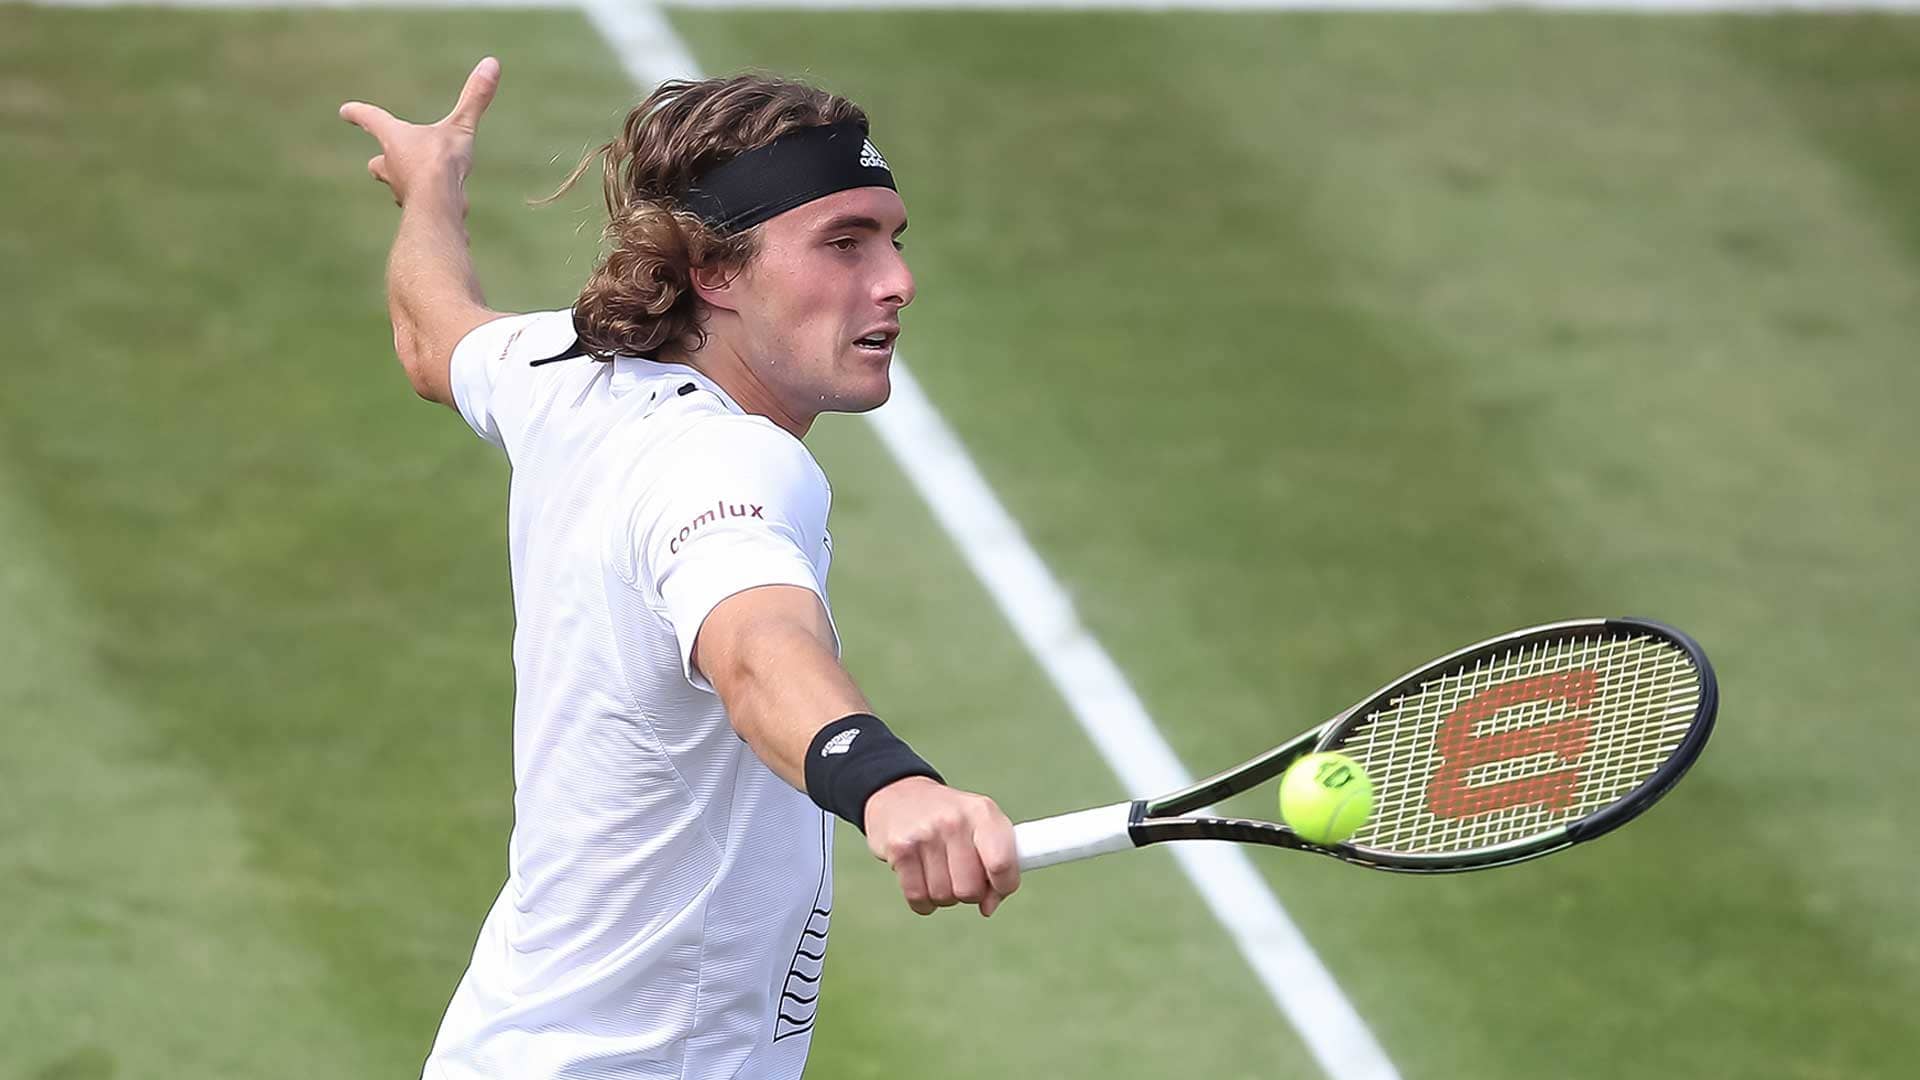 Stefanos Tsitsipas and Nick Kyrgios Face Potential Second-Round Showdown In Halle ATP Tour Tennis